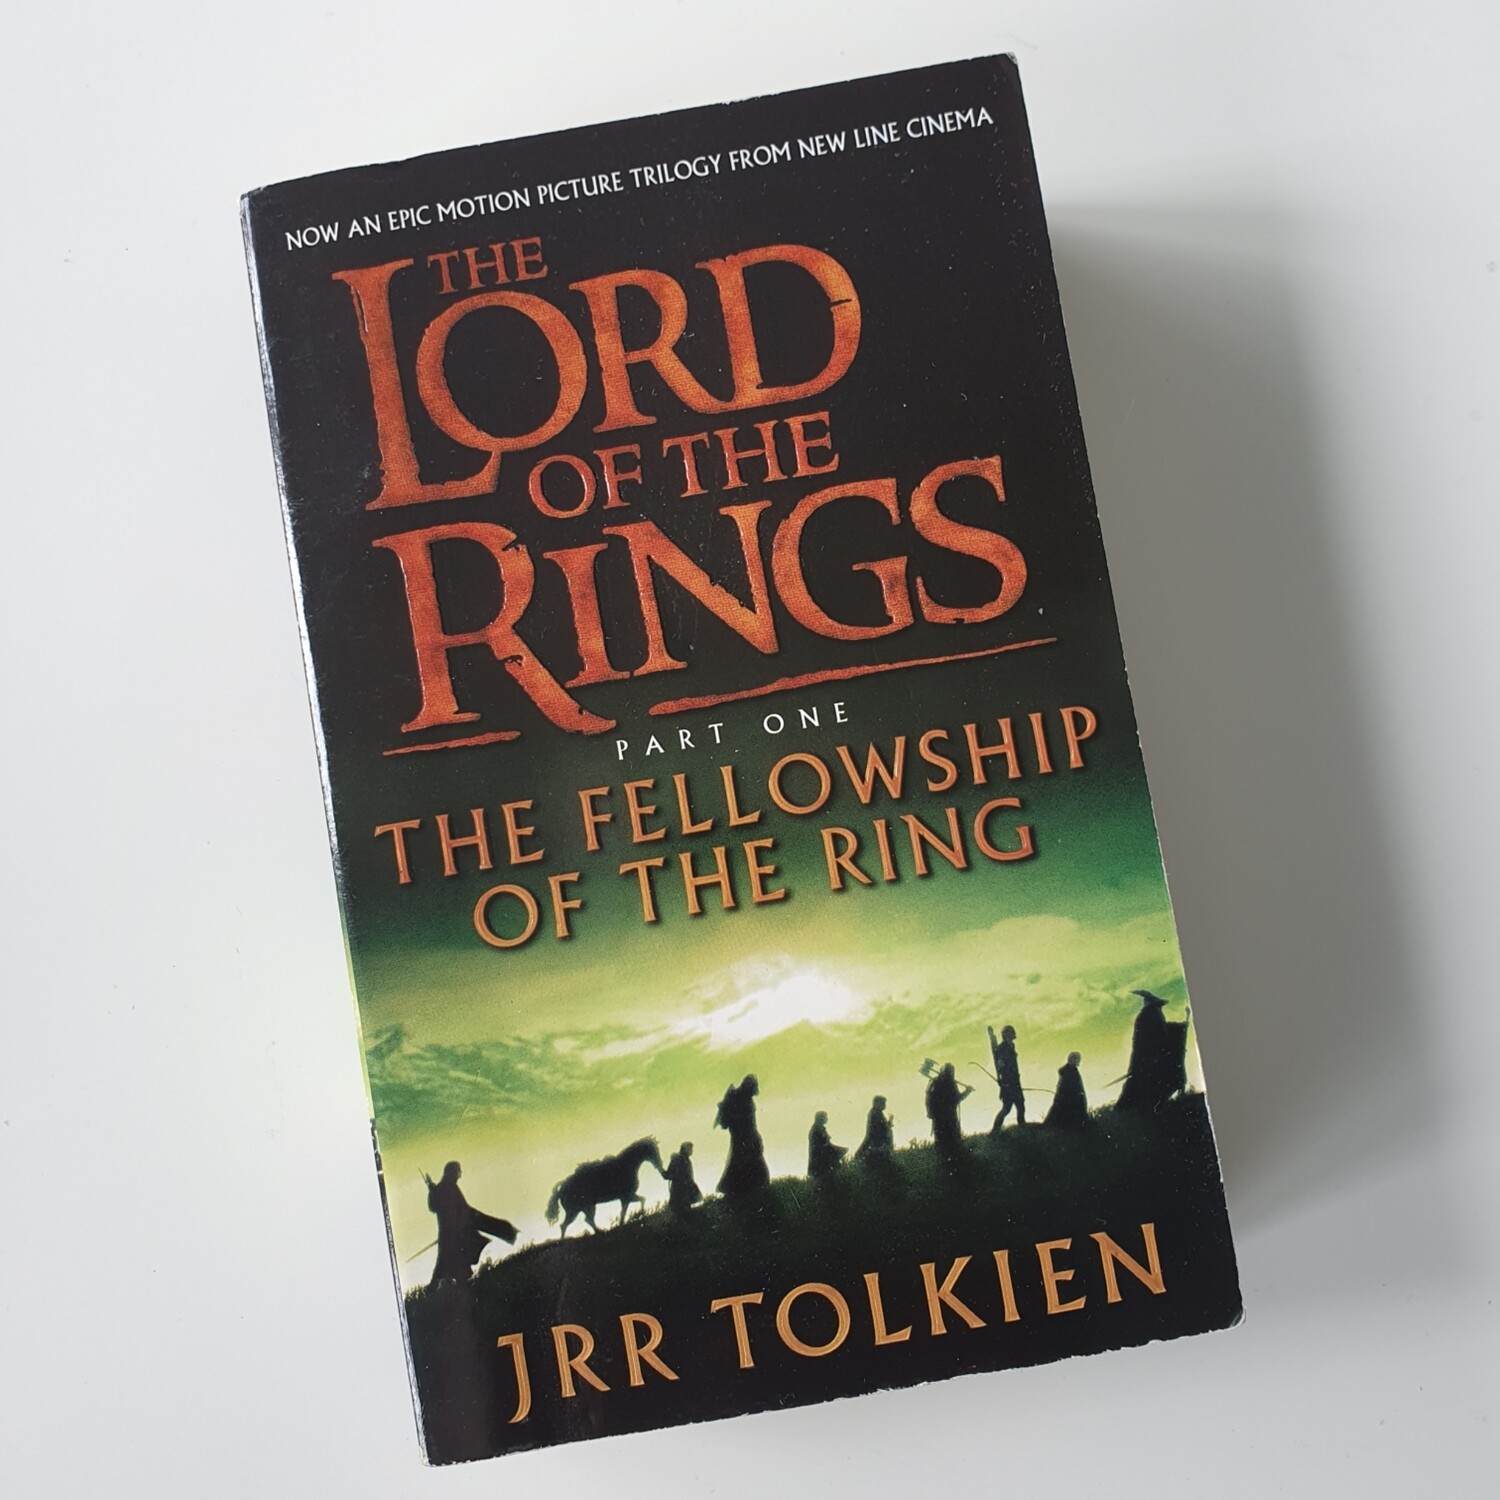 Lord of the Rings Notebook - made from a paperback book